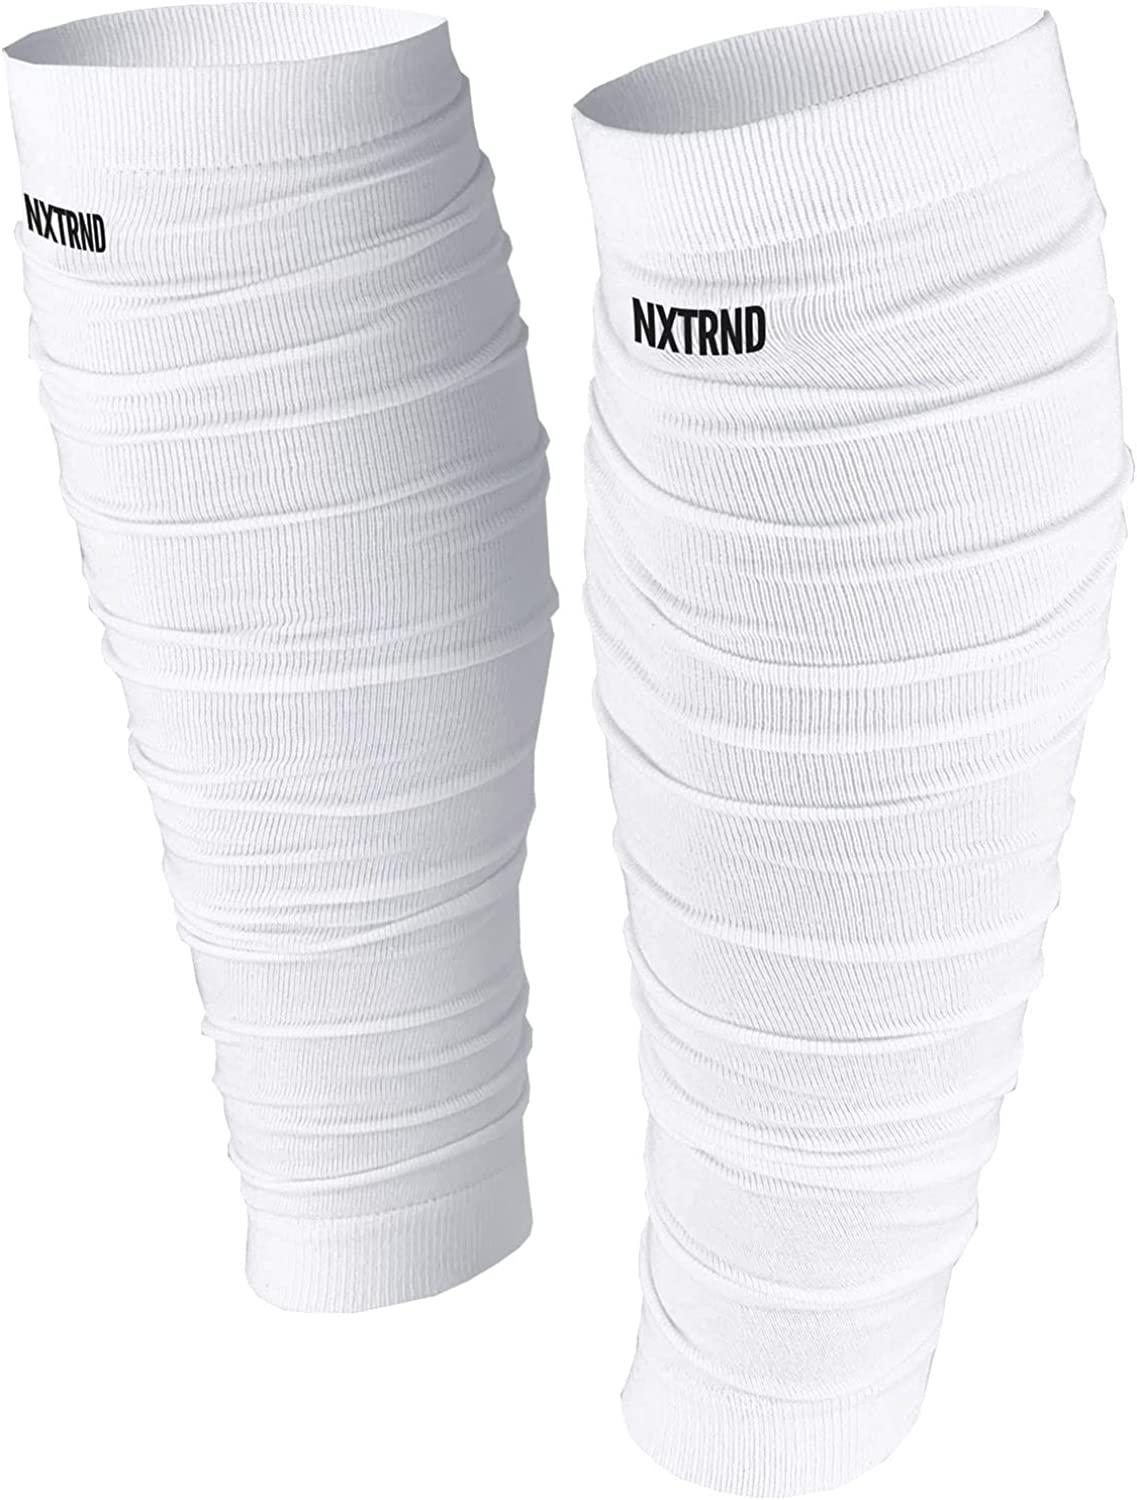 Nxtrnd Football Leg Sleeves, Calf Sleeves for Men & Boys, Sold as a Pair  White One Size